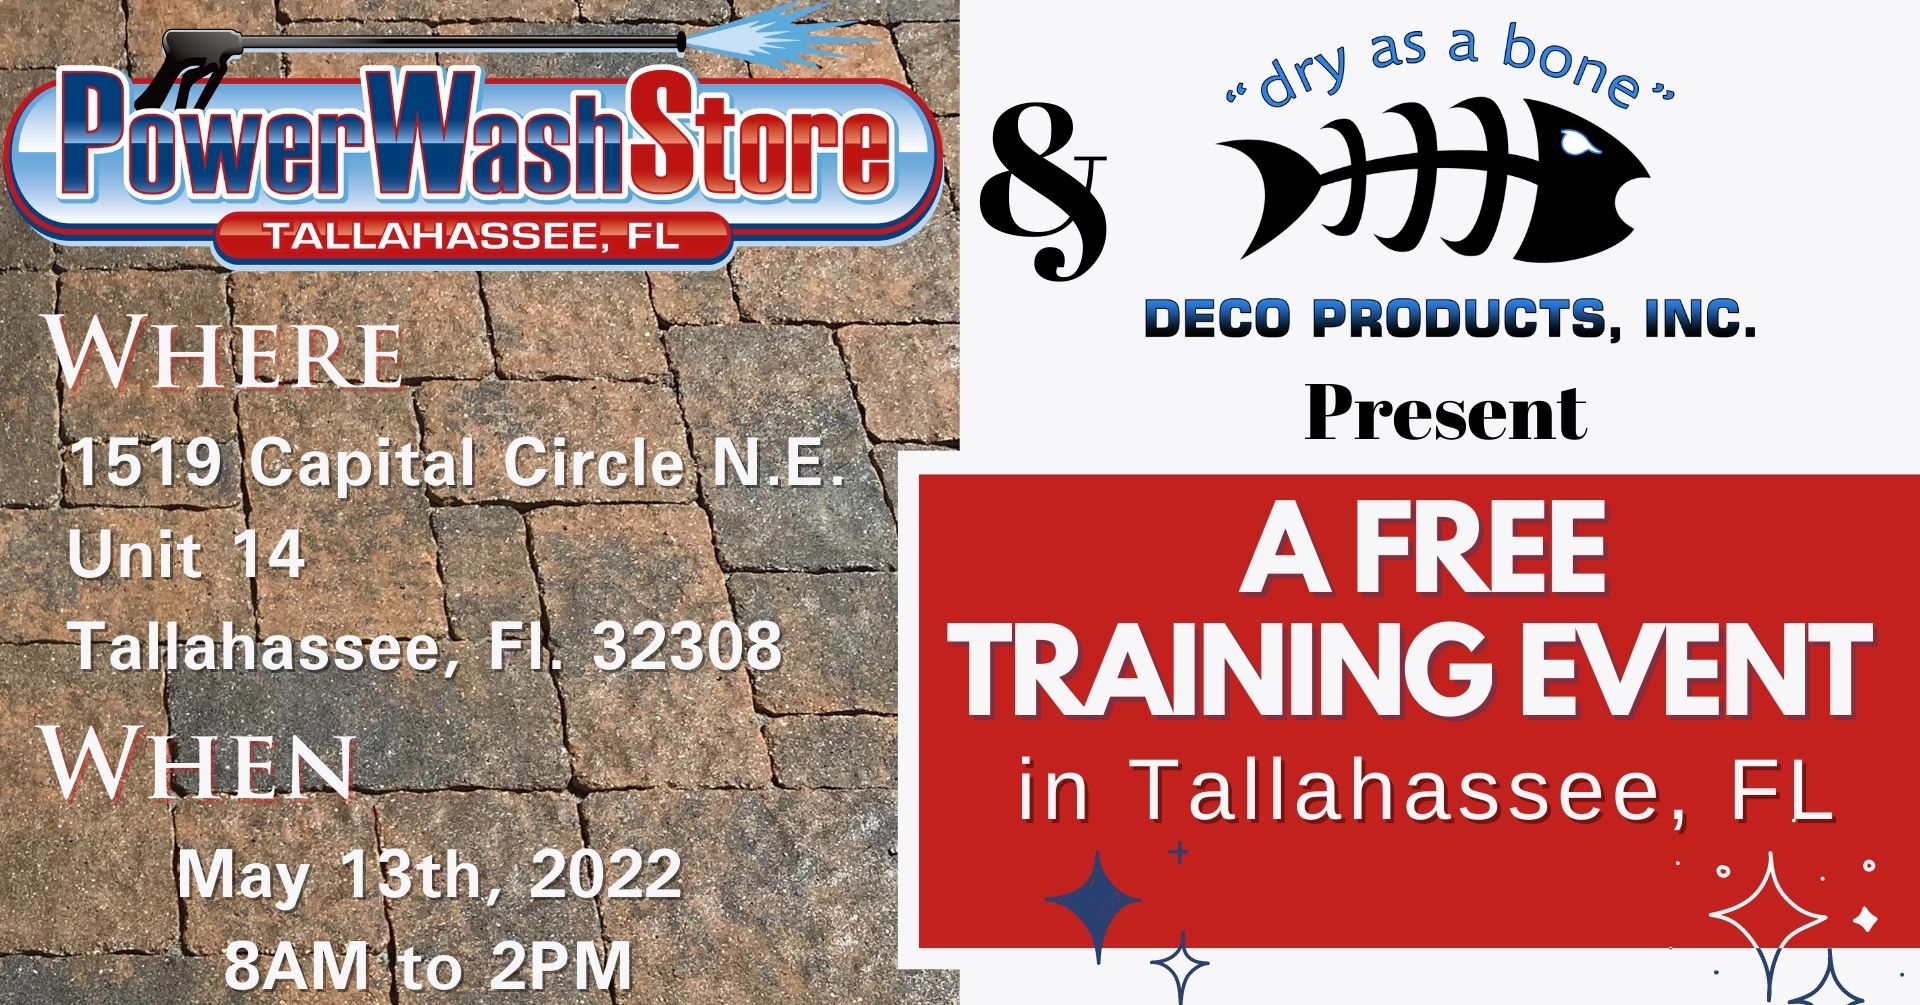 a flyer promoting a free training event for a power wash store